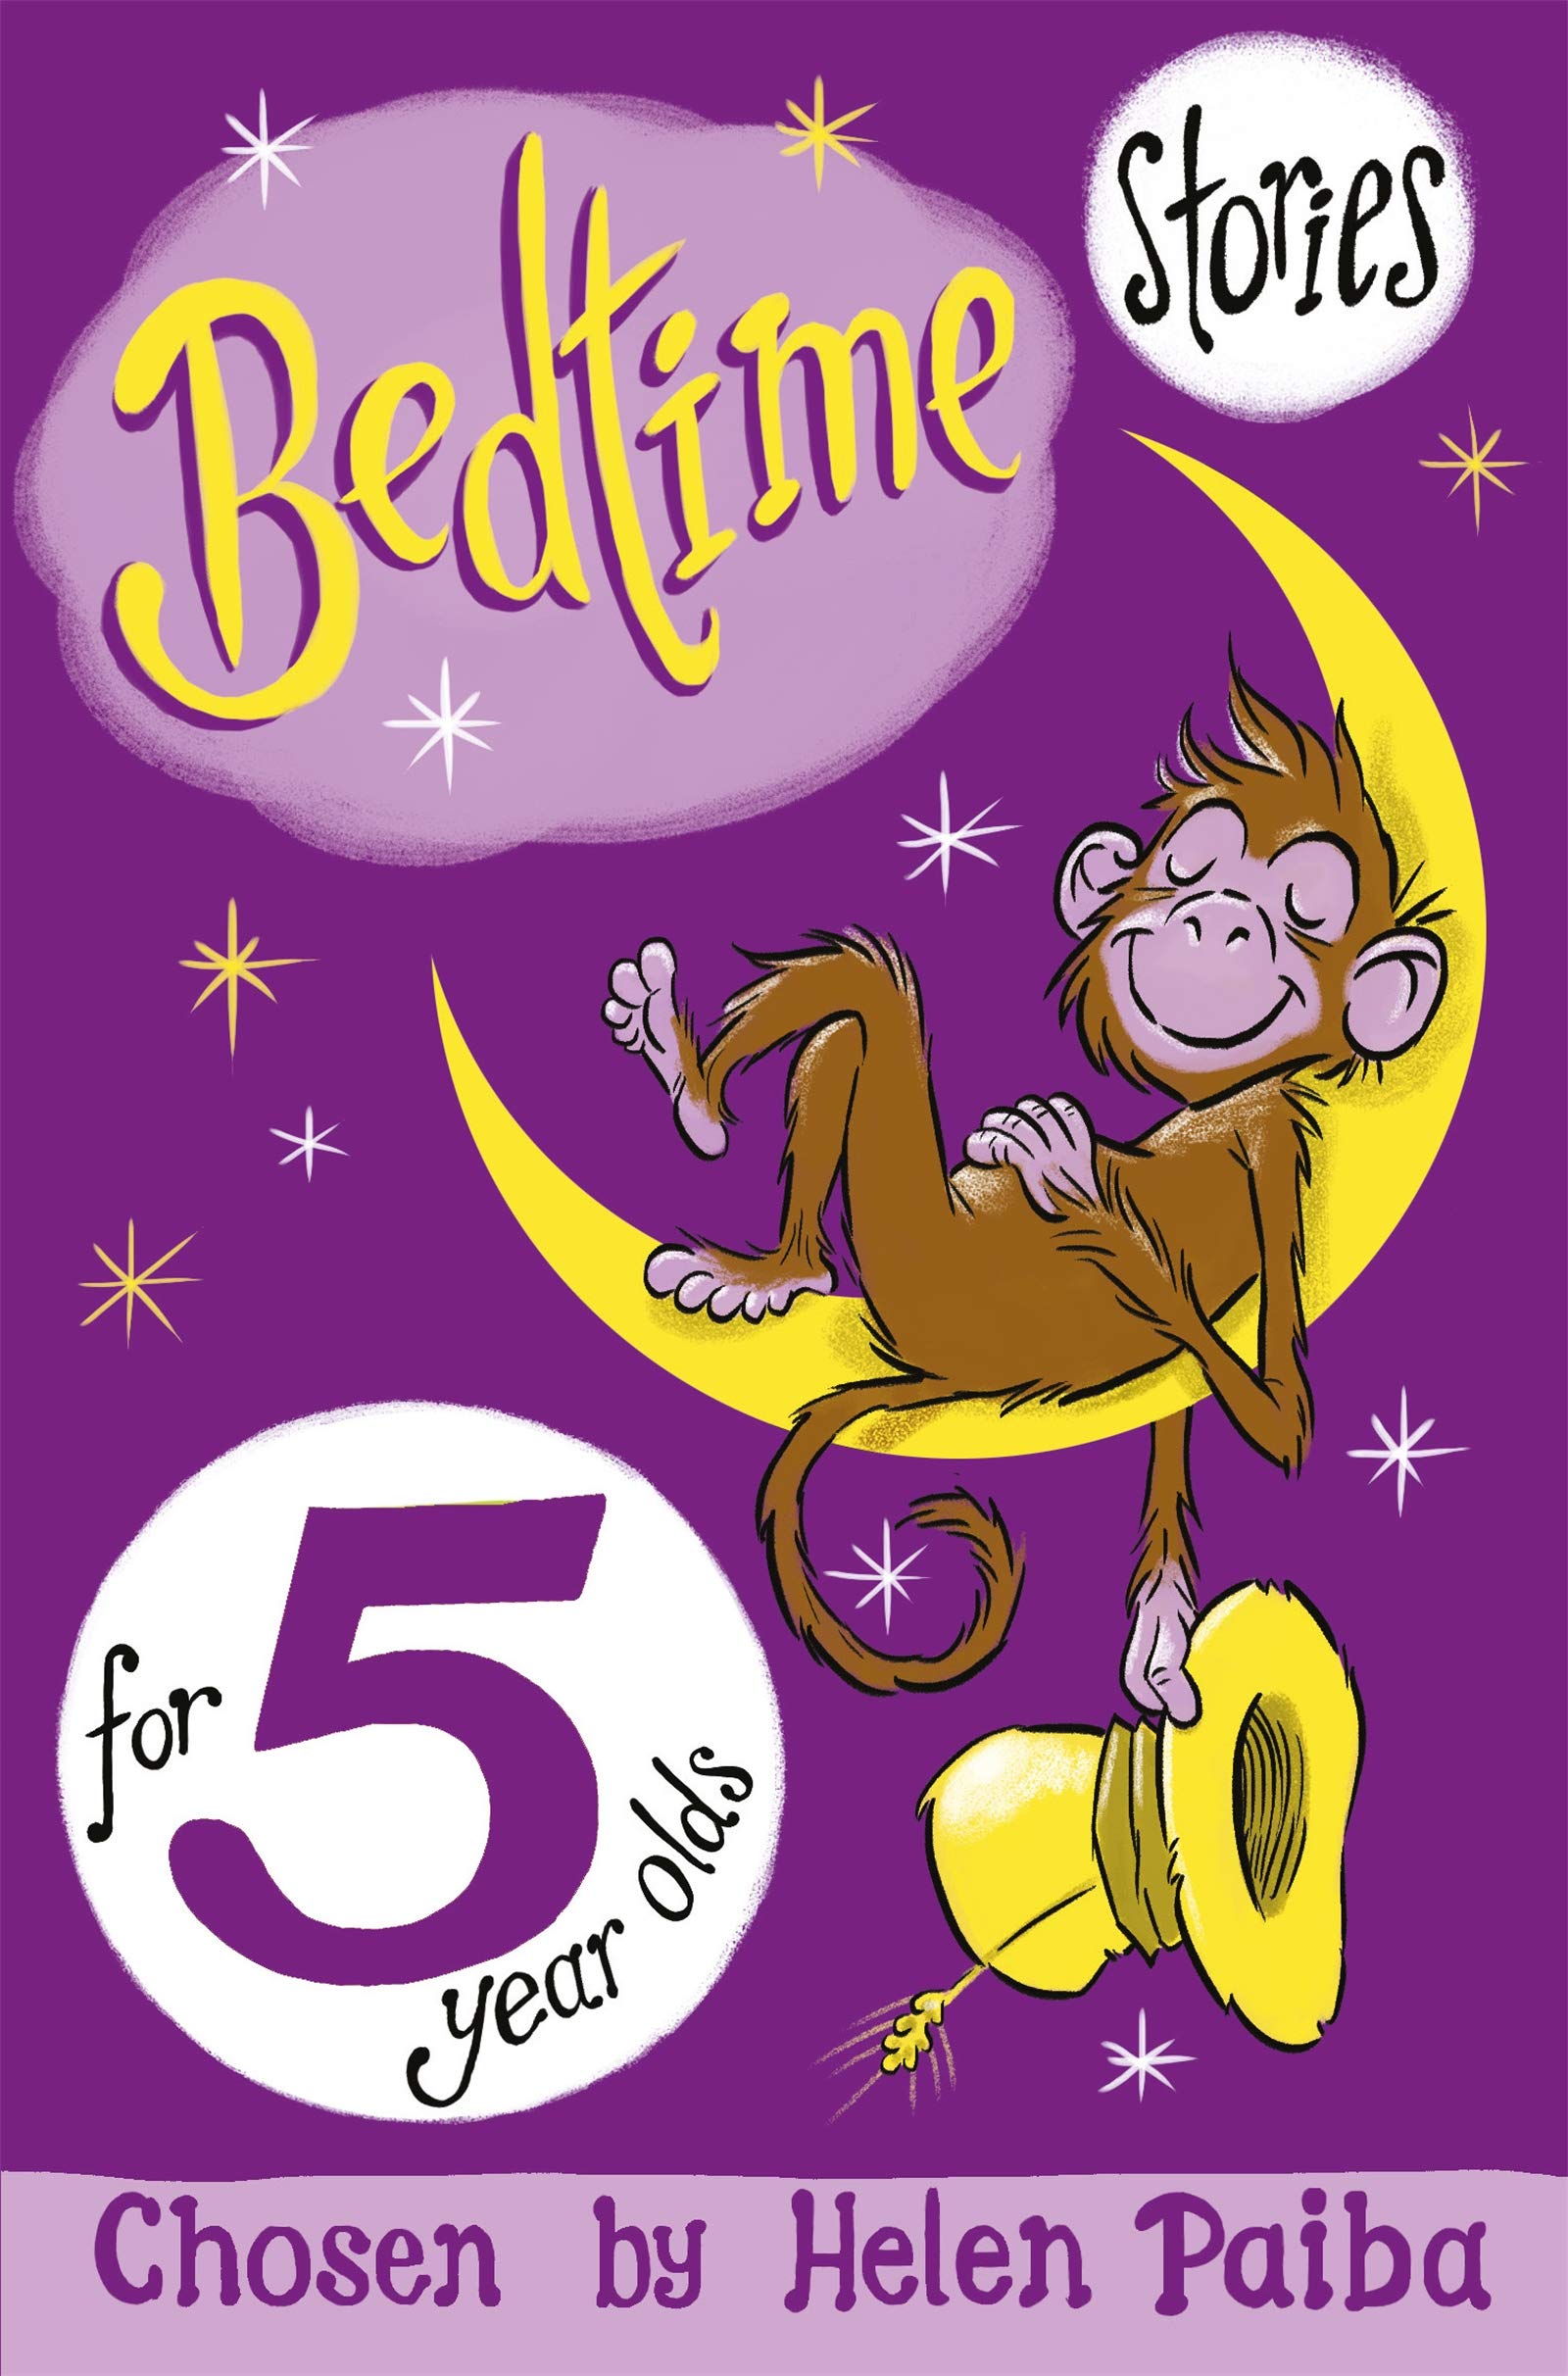 Bedtime Stories For 5 Year Olds - Helen Paiba